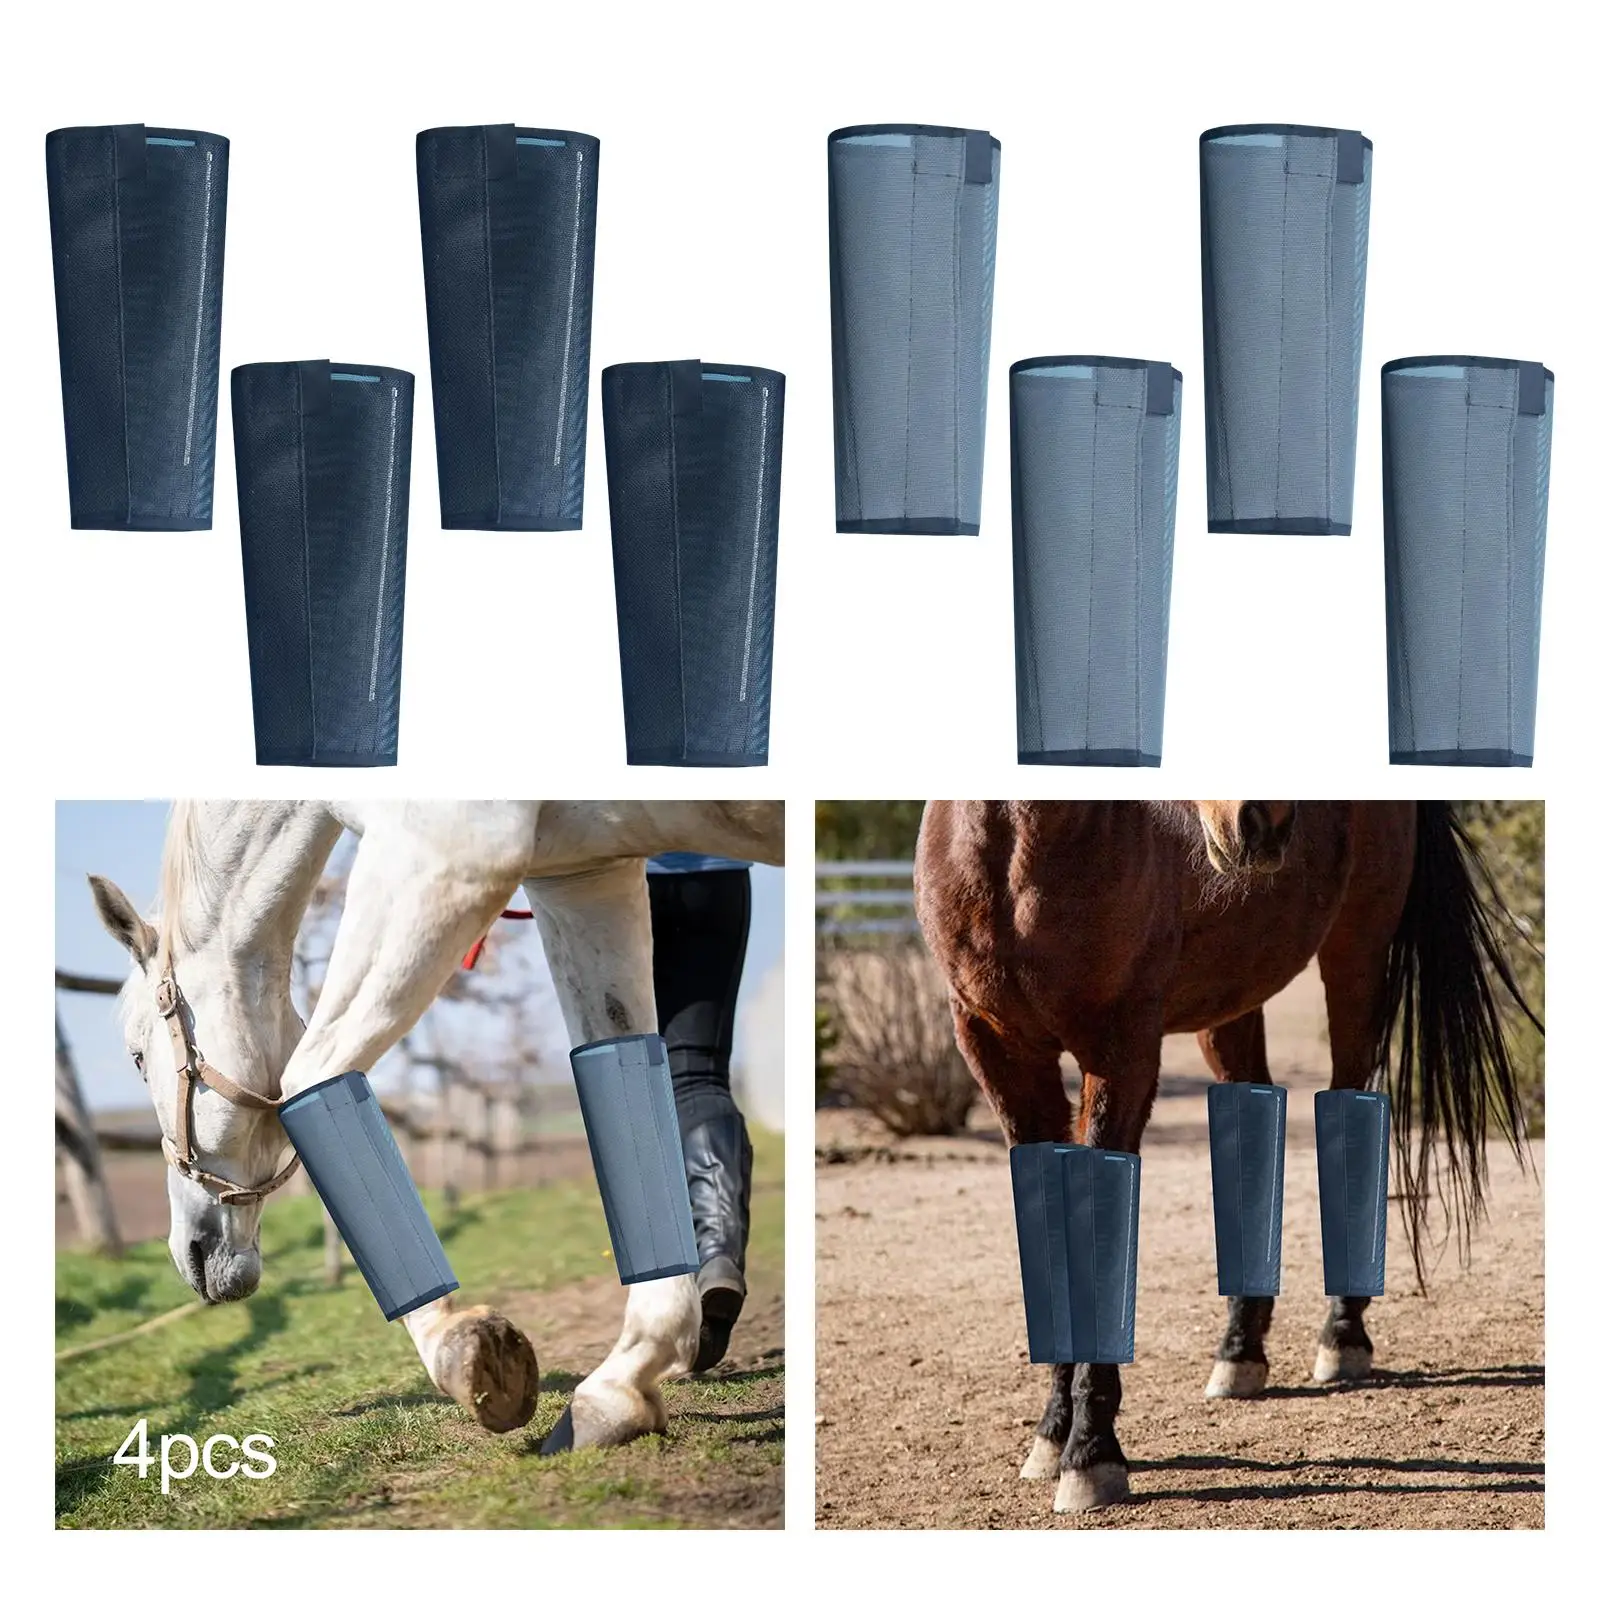 4Pcs Horse Boots Training Mesh Outdoor Breathable Jumping Riding Leg Guard